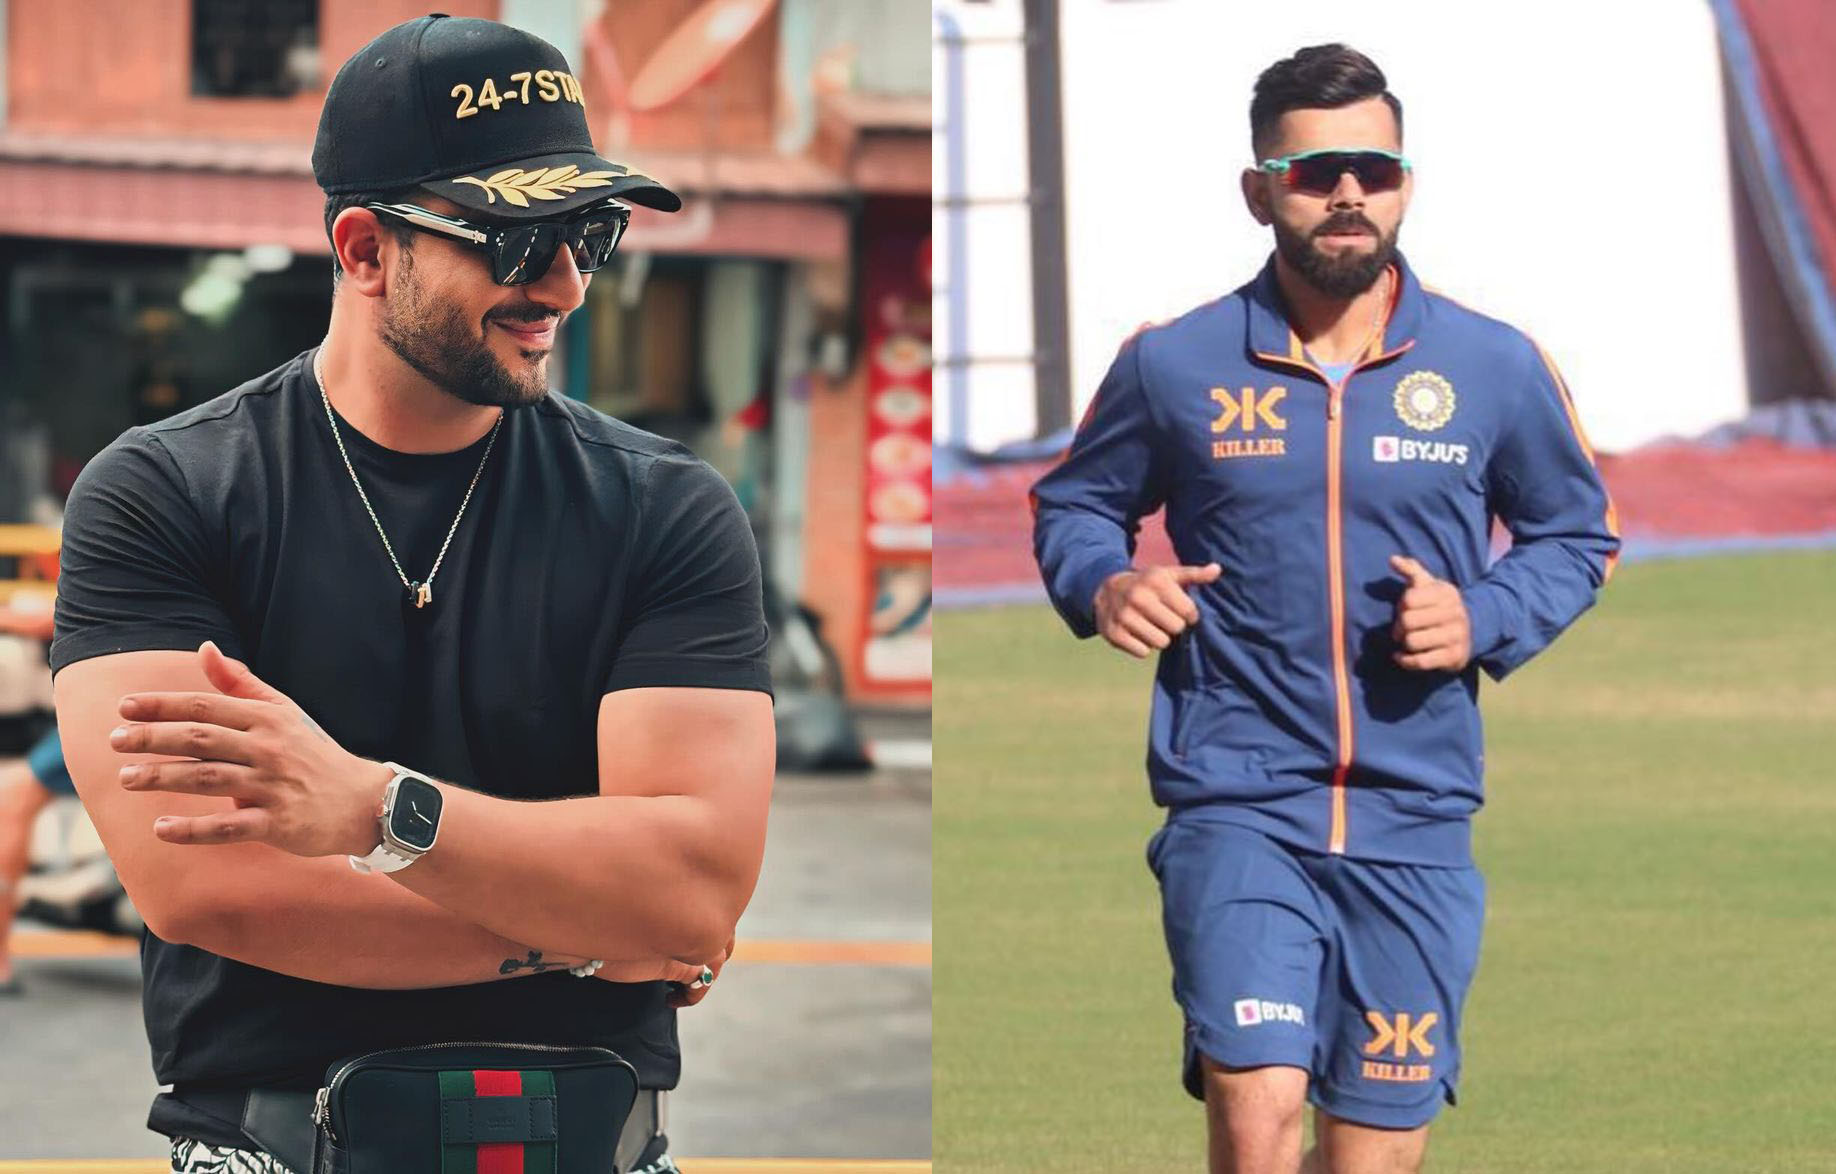 Our Sport’s Enthusiastic Actor Aly Goni Praises Virat Kohli. Do You Wanna Know About It? Read On!